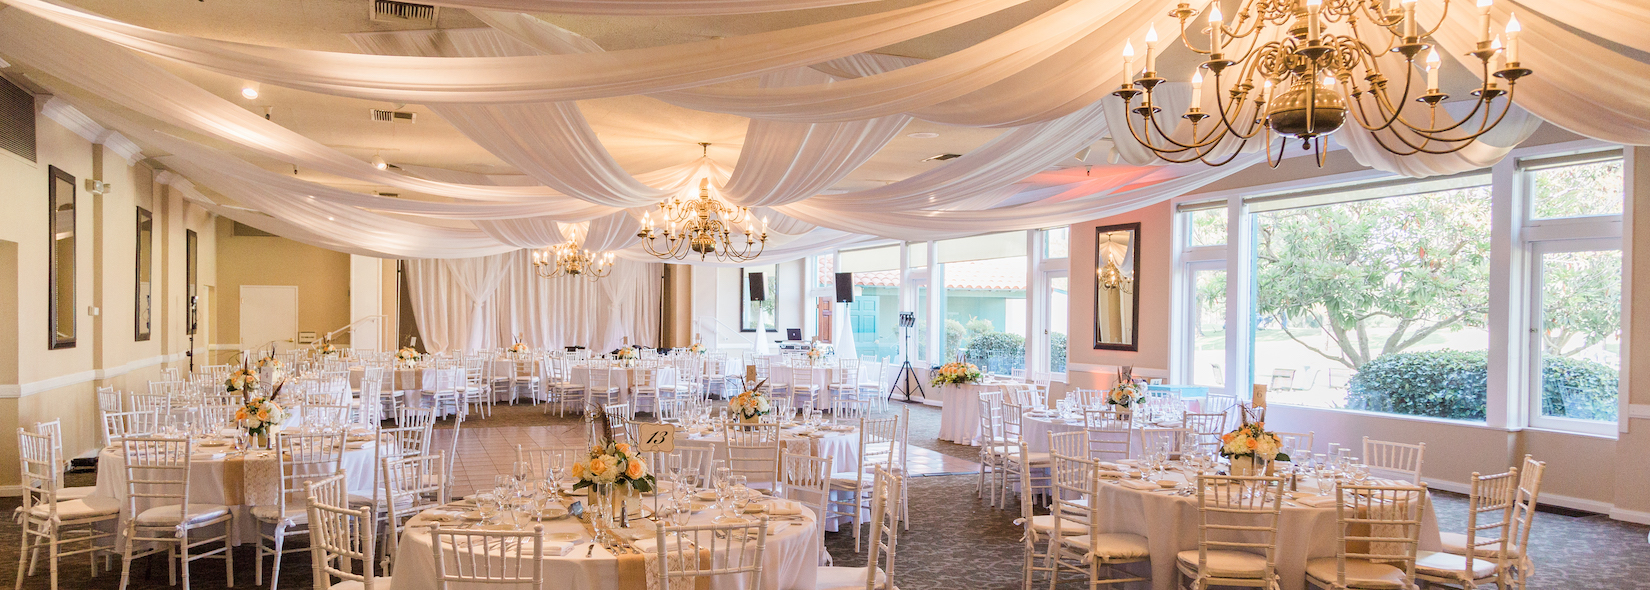  Lakewood  Wedding  Venues  Country Club Receptions